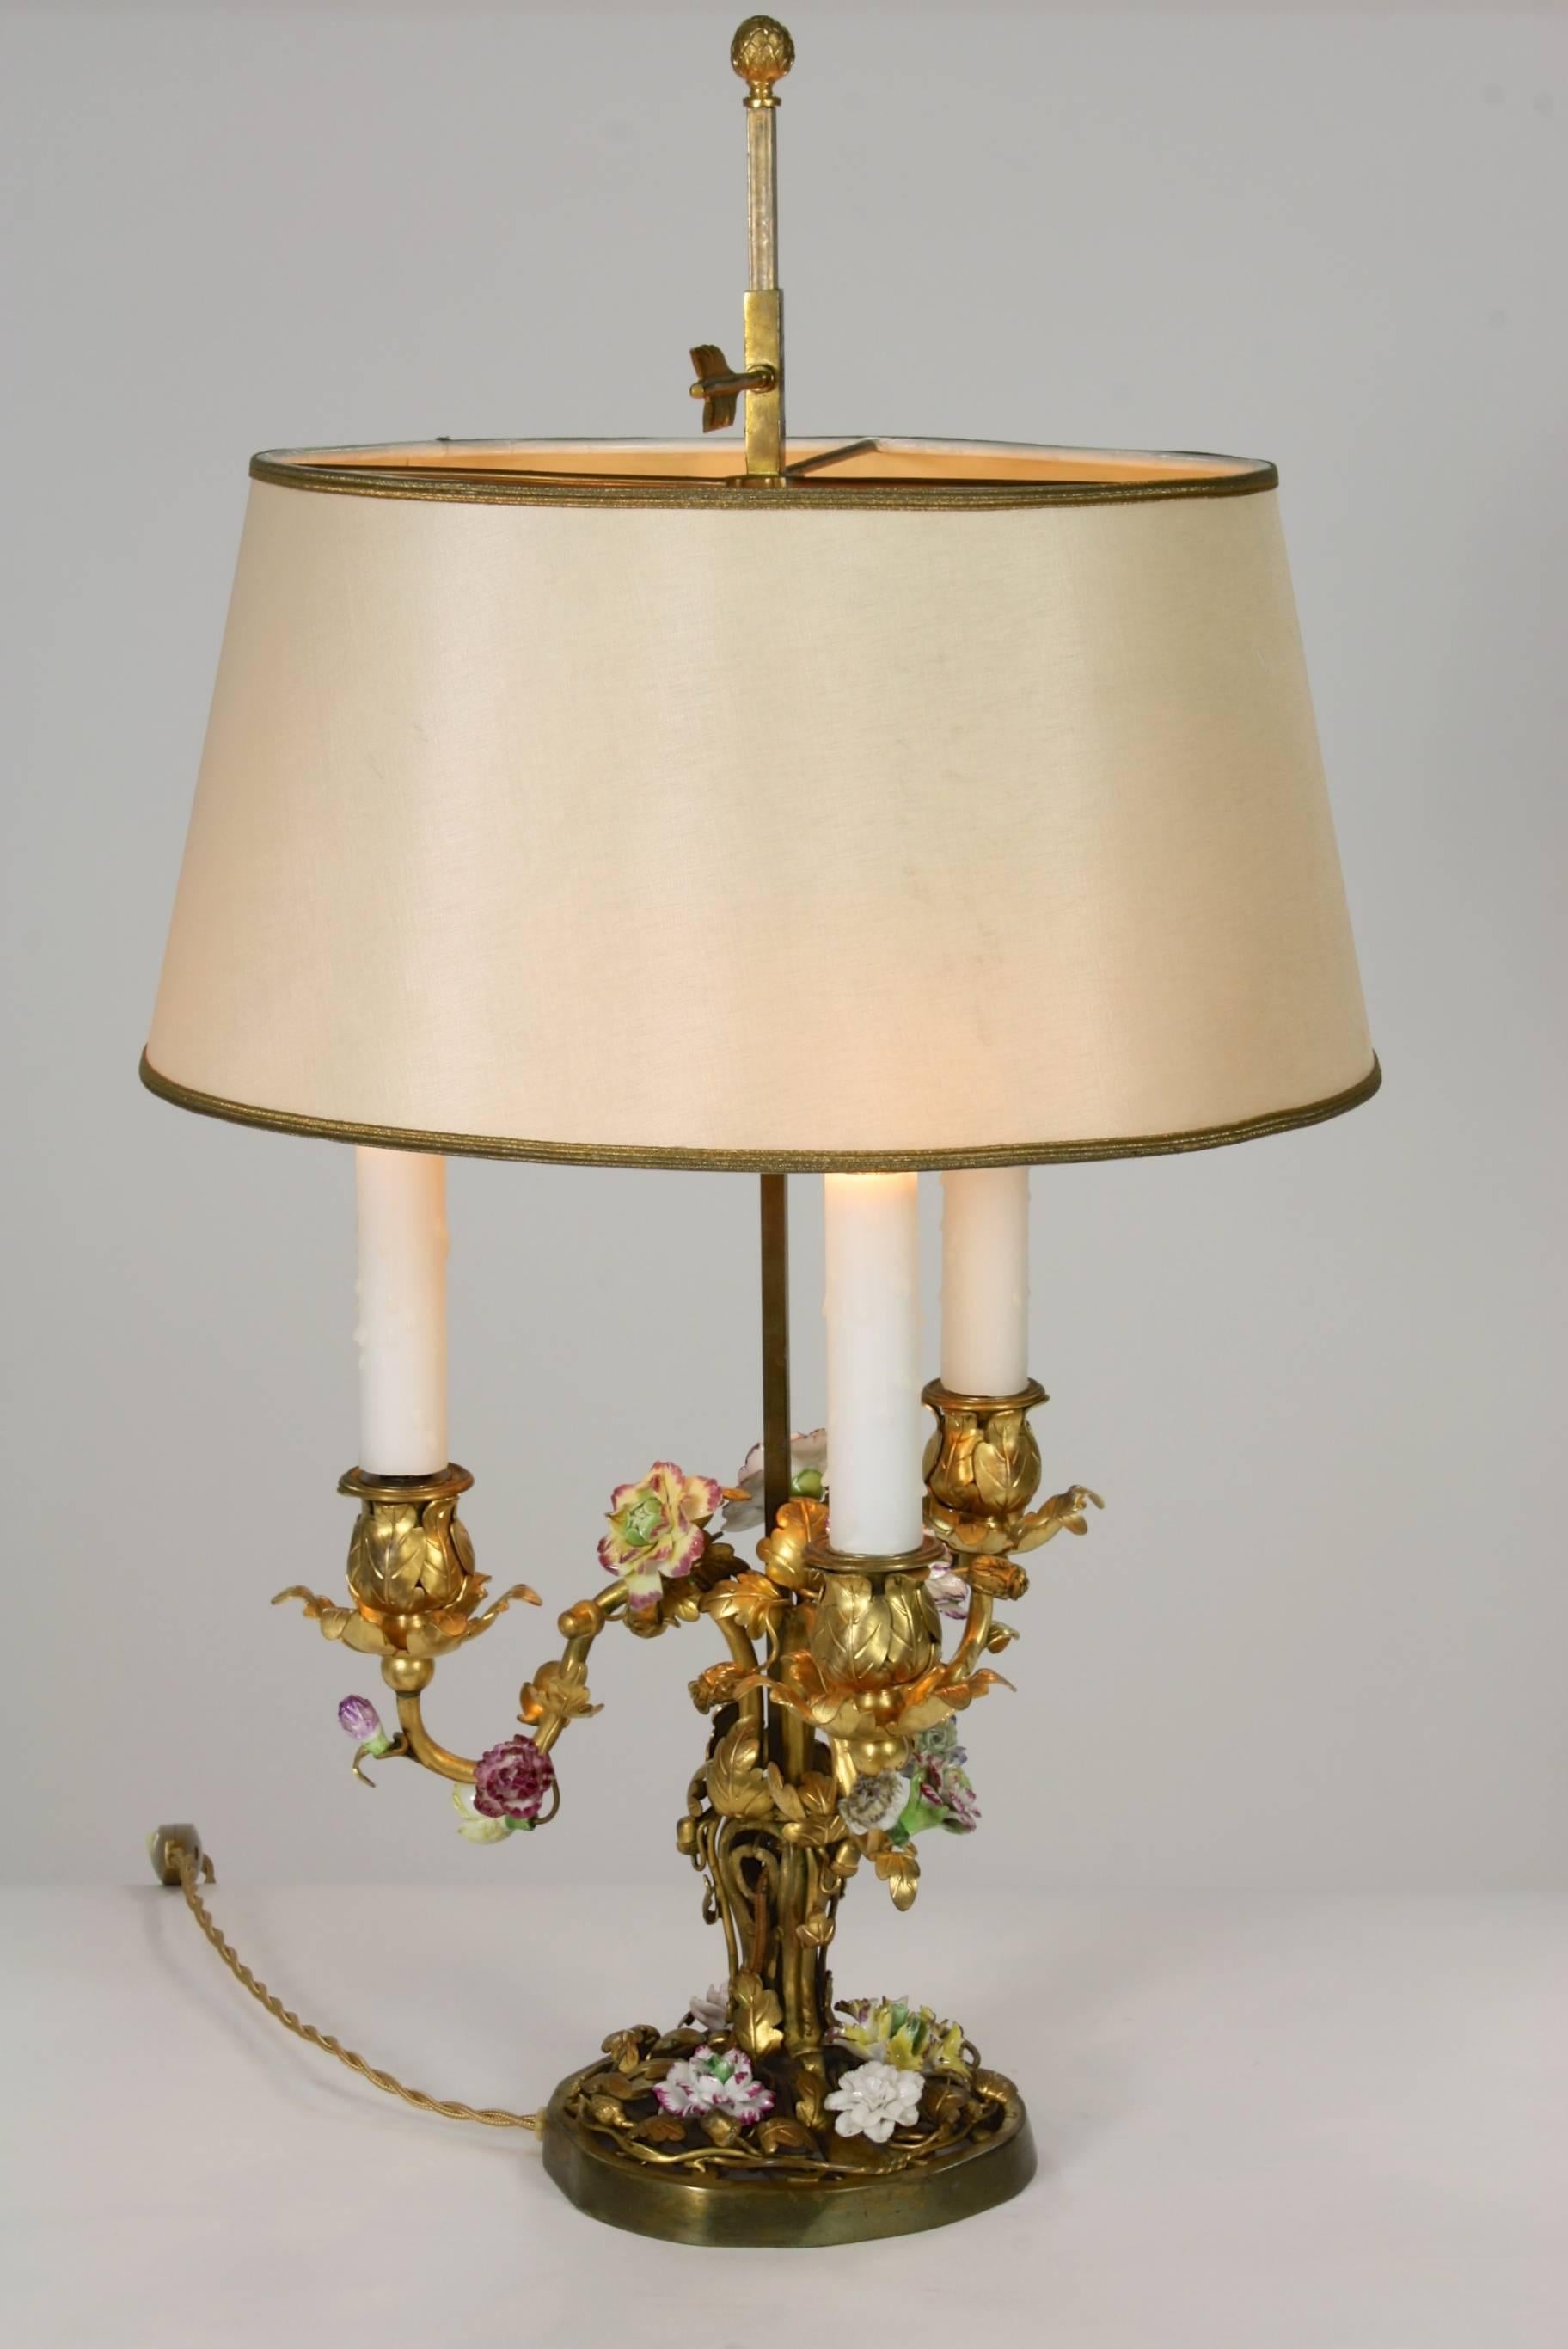 A very fine, 19th century French gilt bronze Louis XV style bouillotte lamp, in foliate form with multicolored porcelain flowers, electrified with three lights. Silk over paper adjustable shade. Napoleon III period.